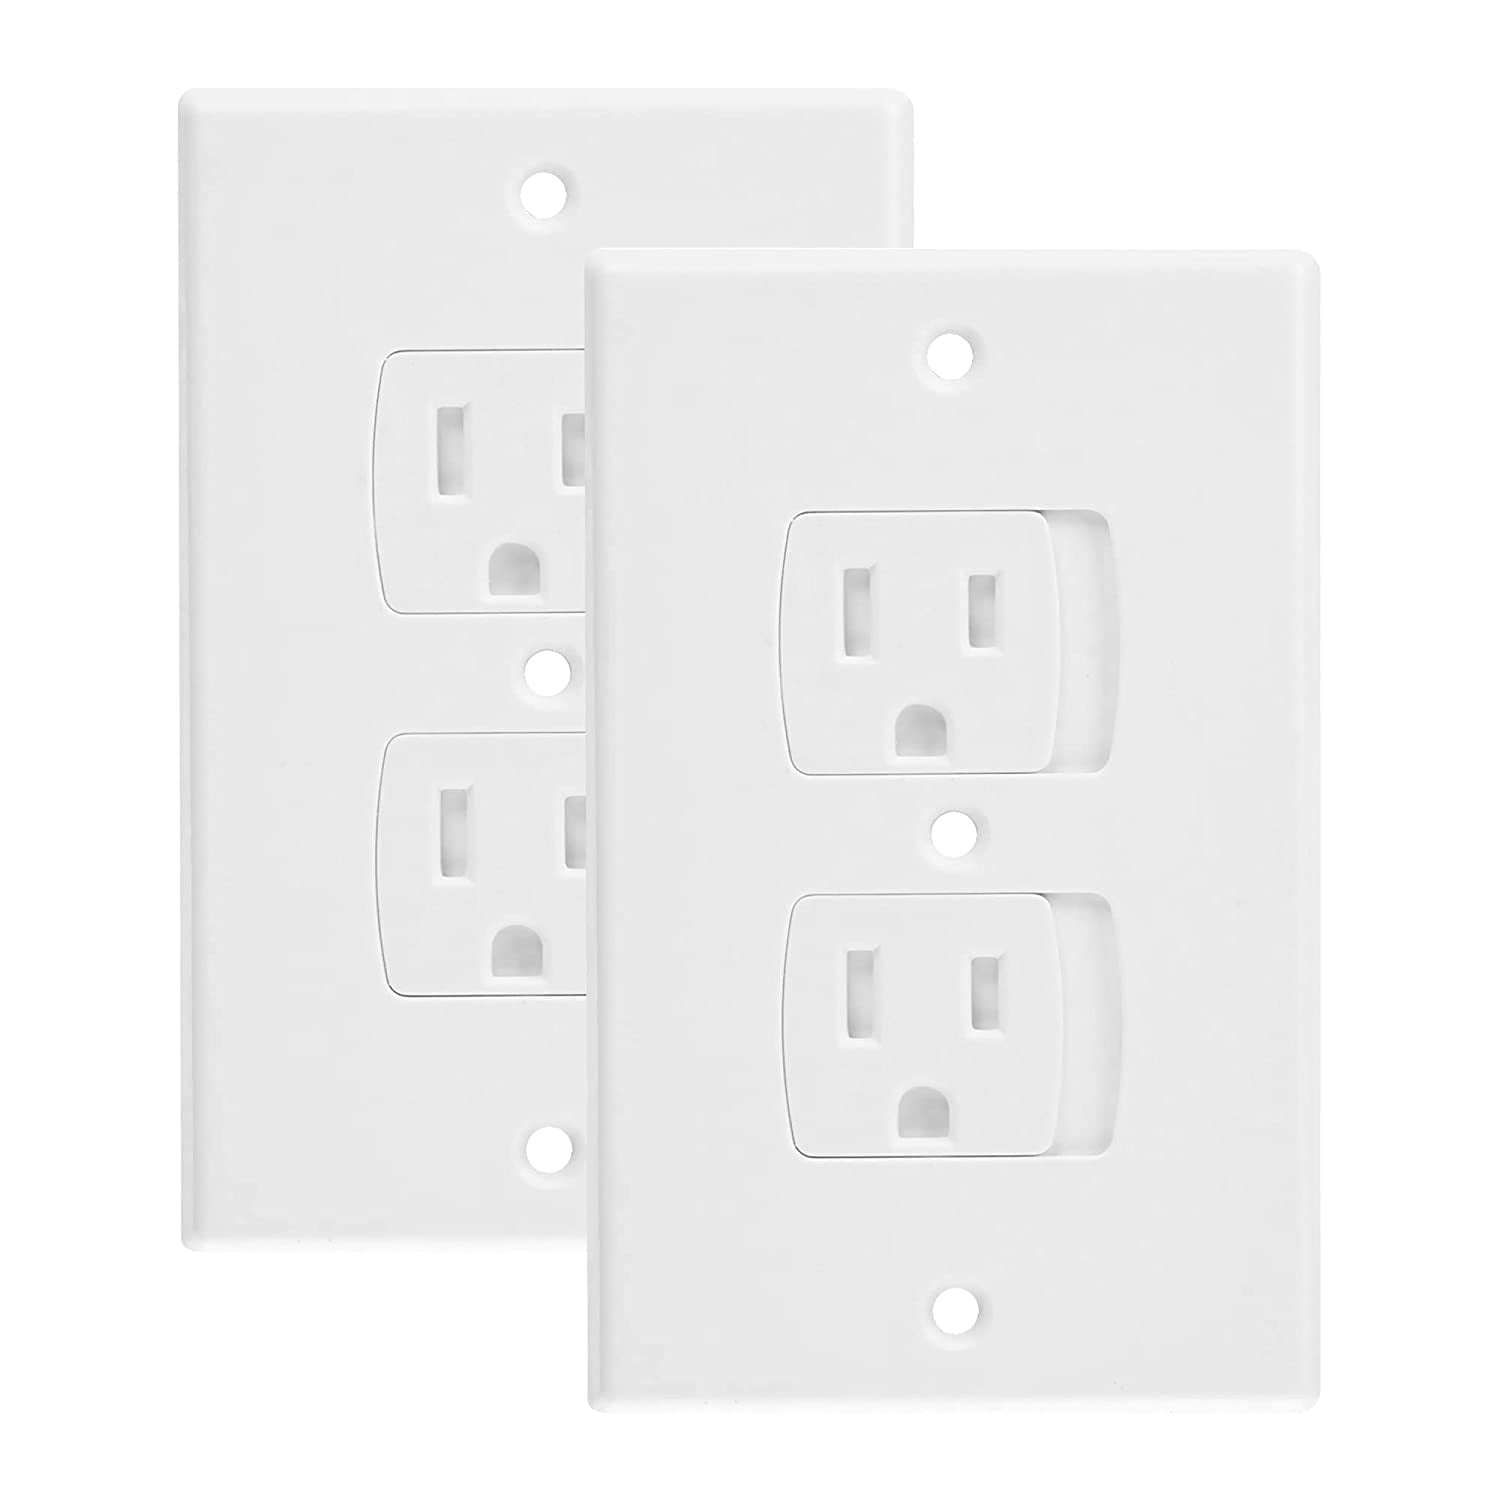 10Pcs Outlet Cover Plug Safe Decorator Child Baby Safety Protection Socket Cover 